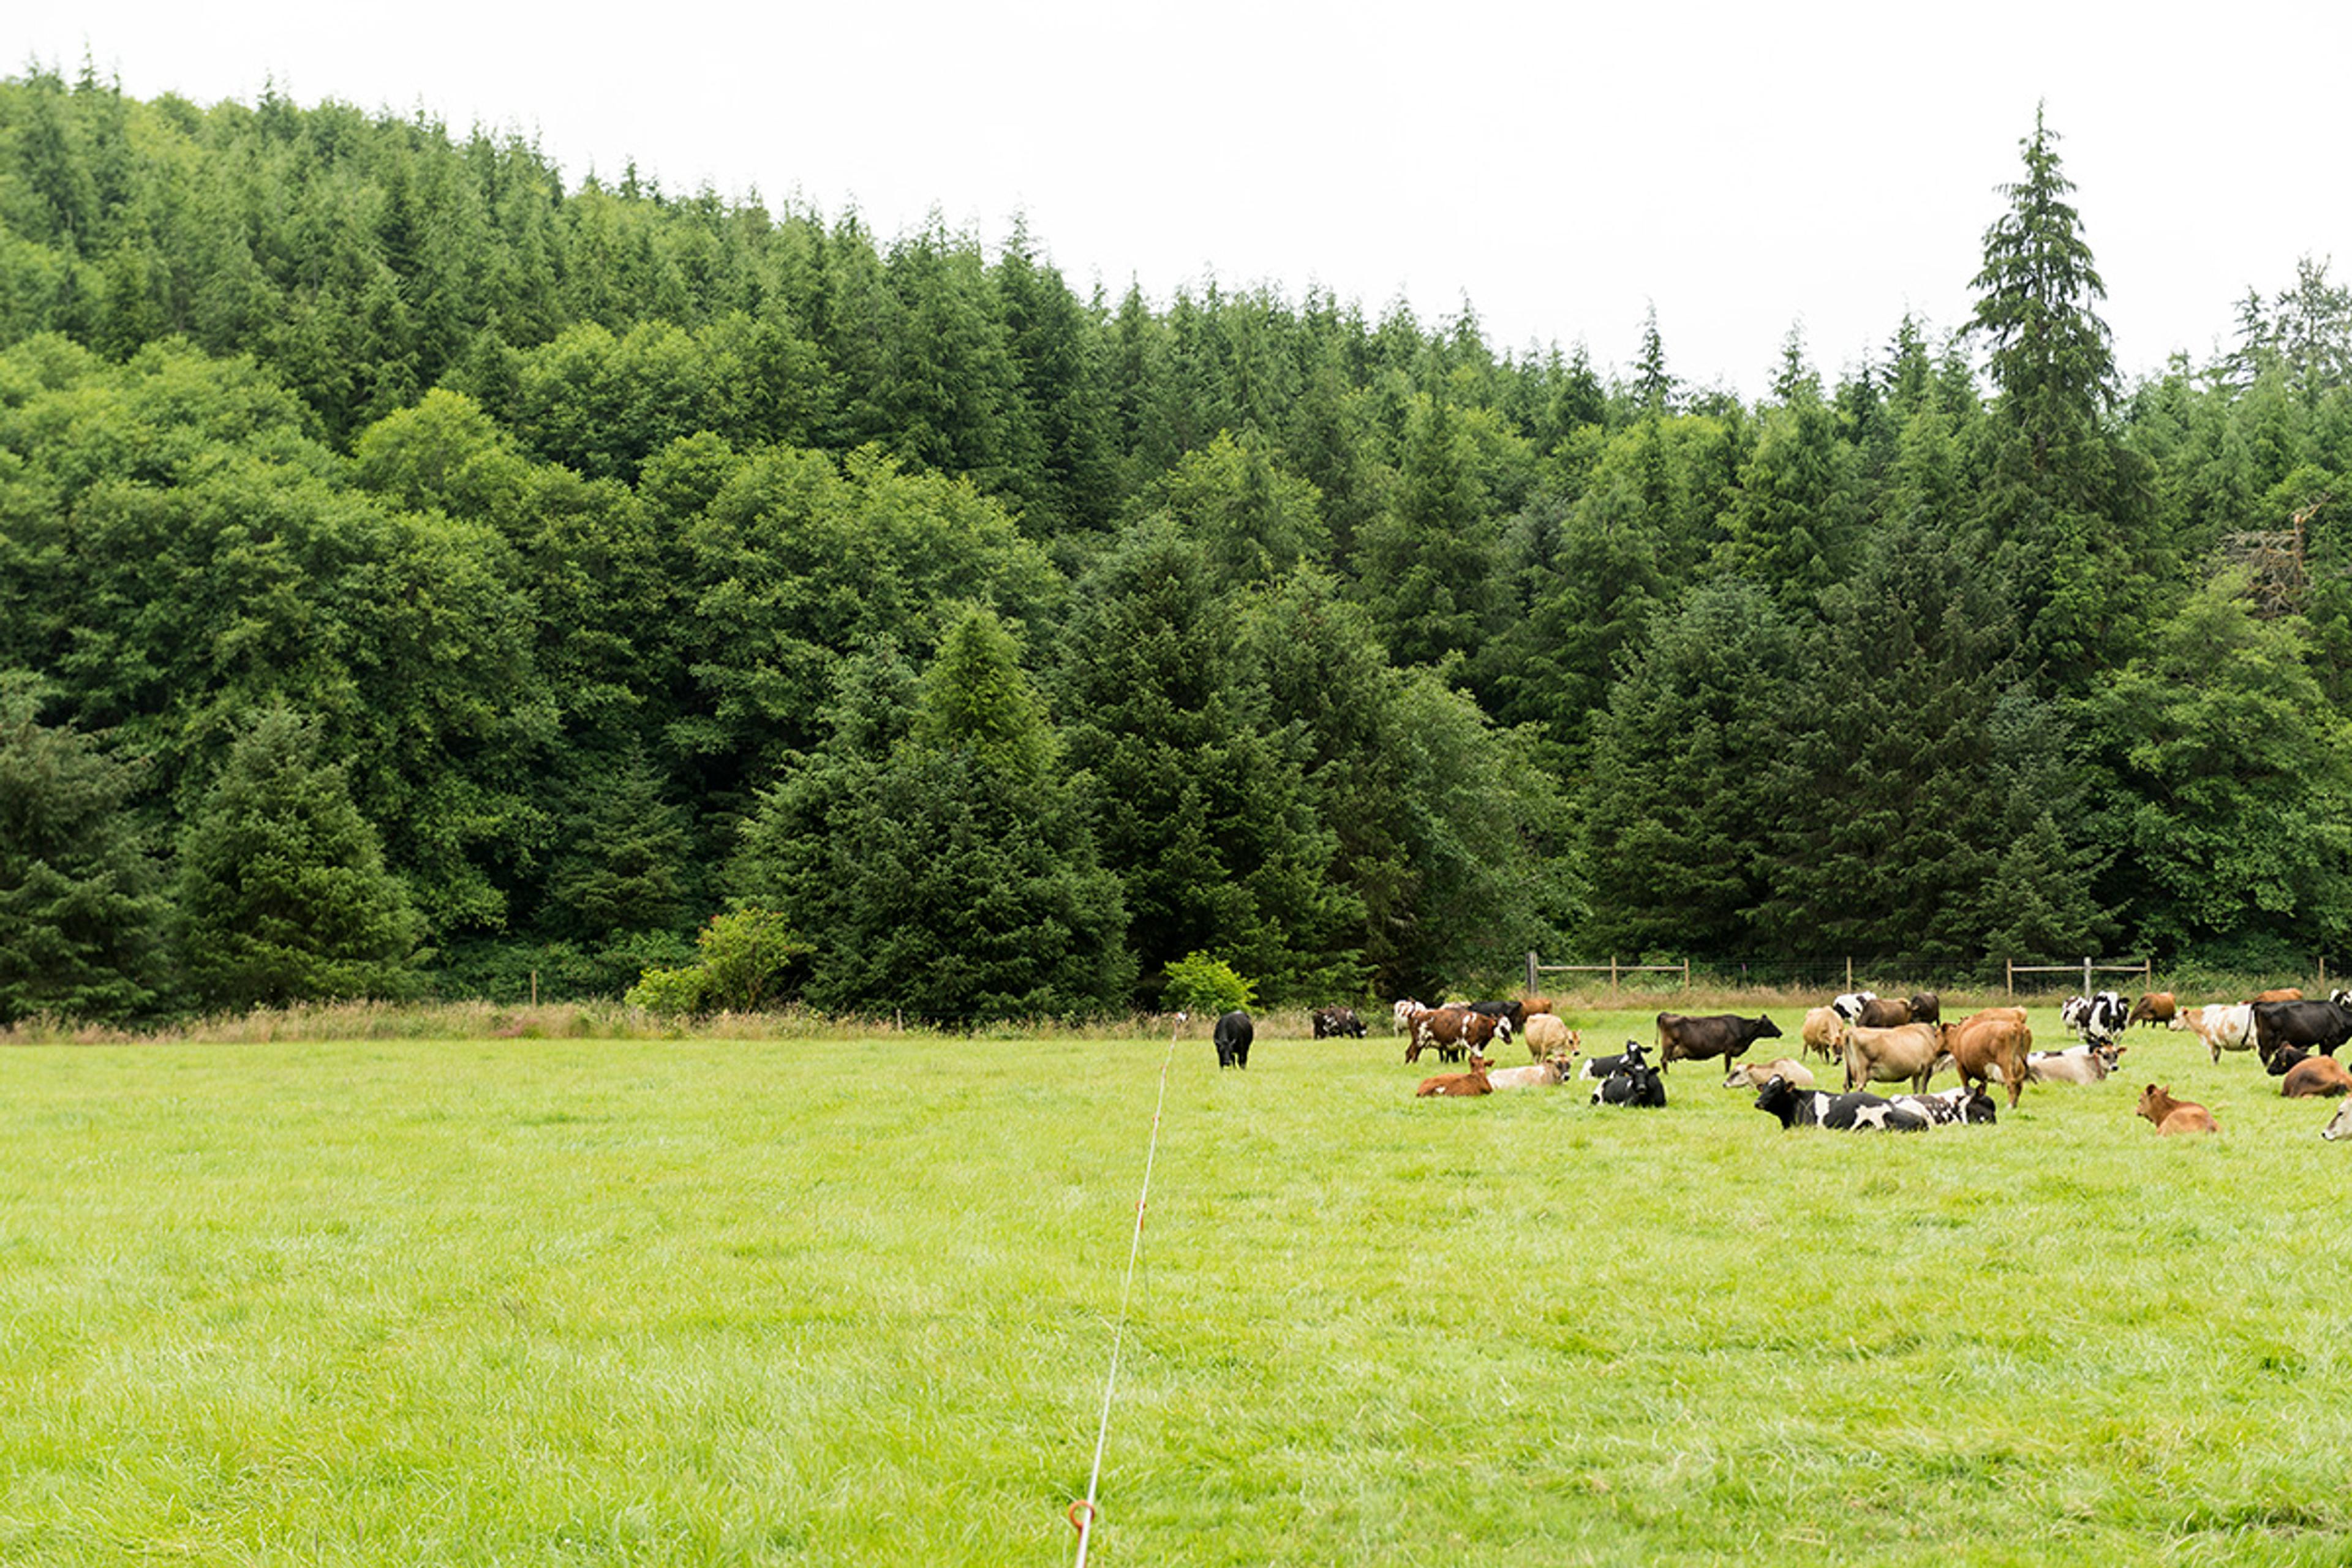 Some cows browse pasture while others take a rest.